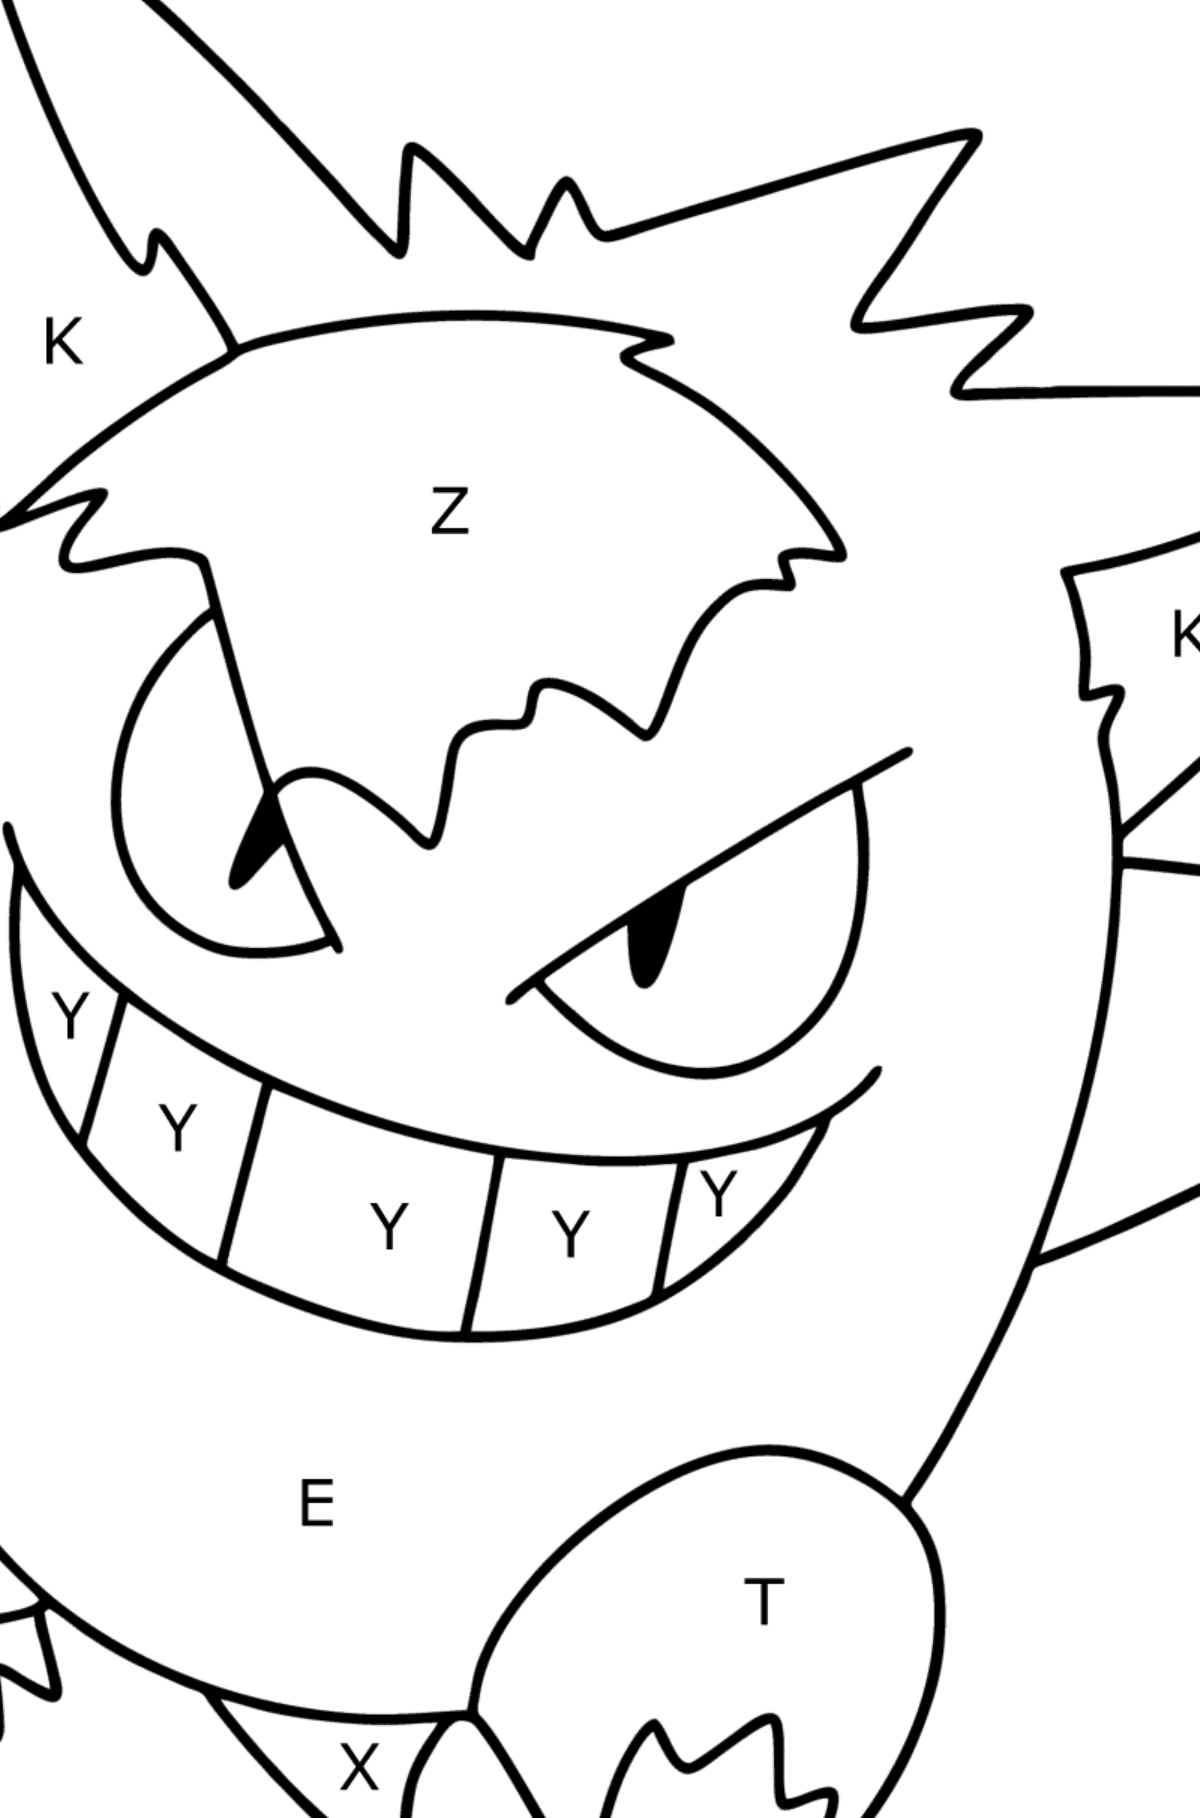 Pokémon Go Gengar coloring page - Coloring by Letters for Kids